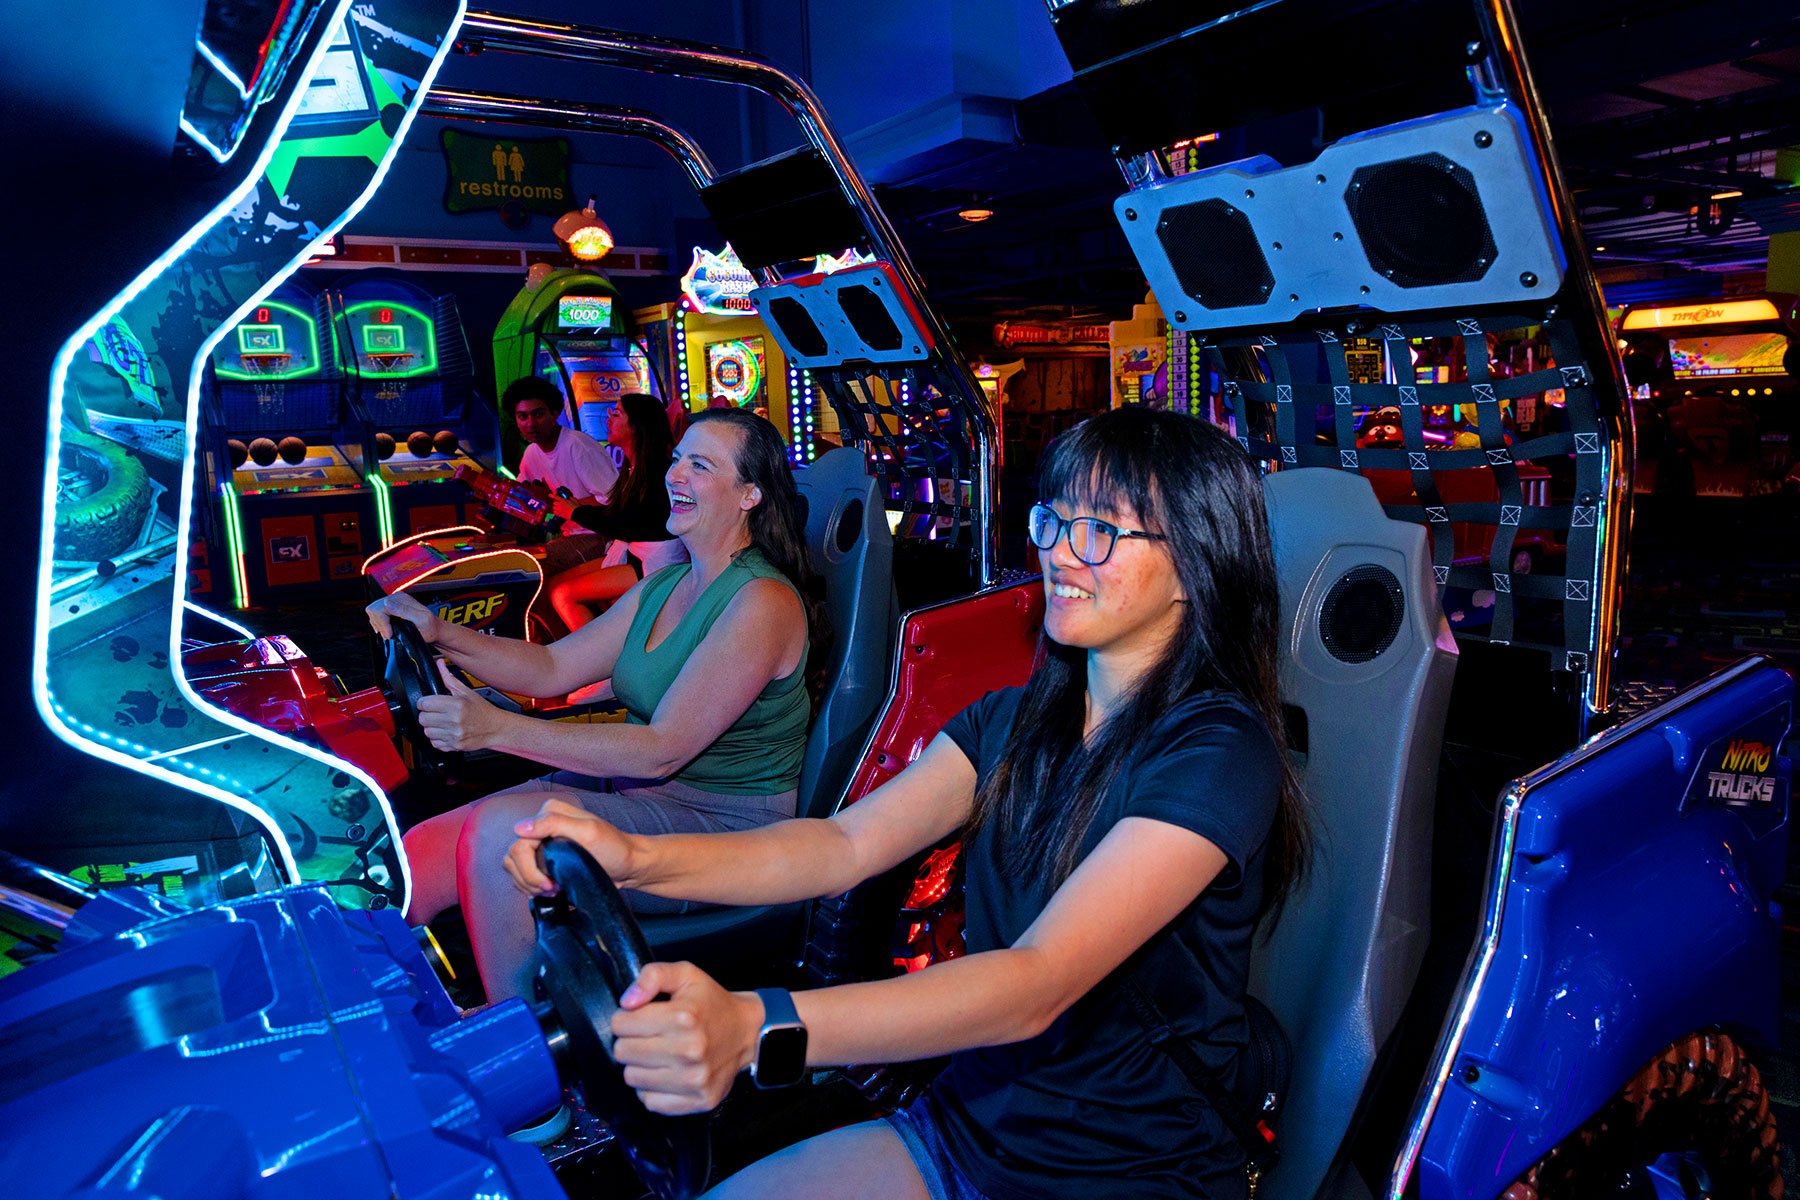 Daughter and mom pair up for battle with driving arcade game